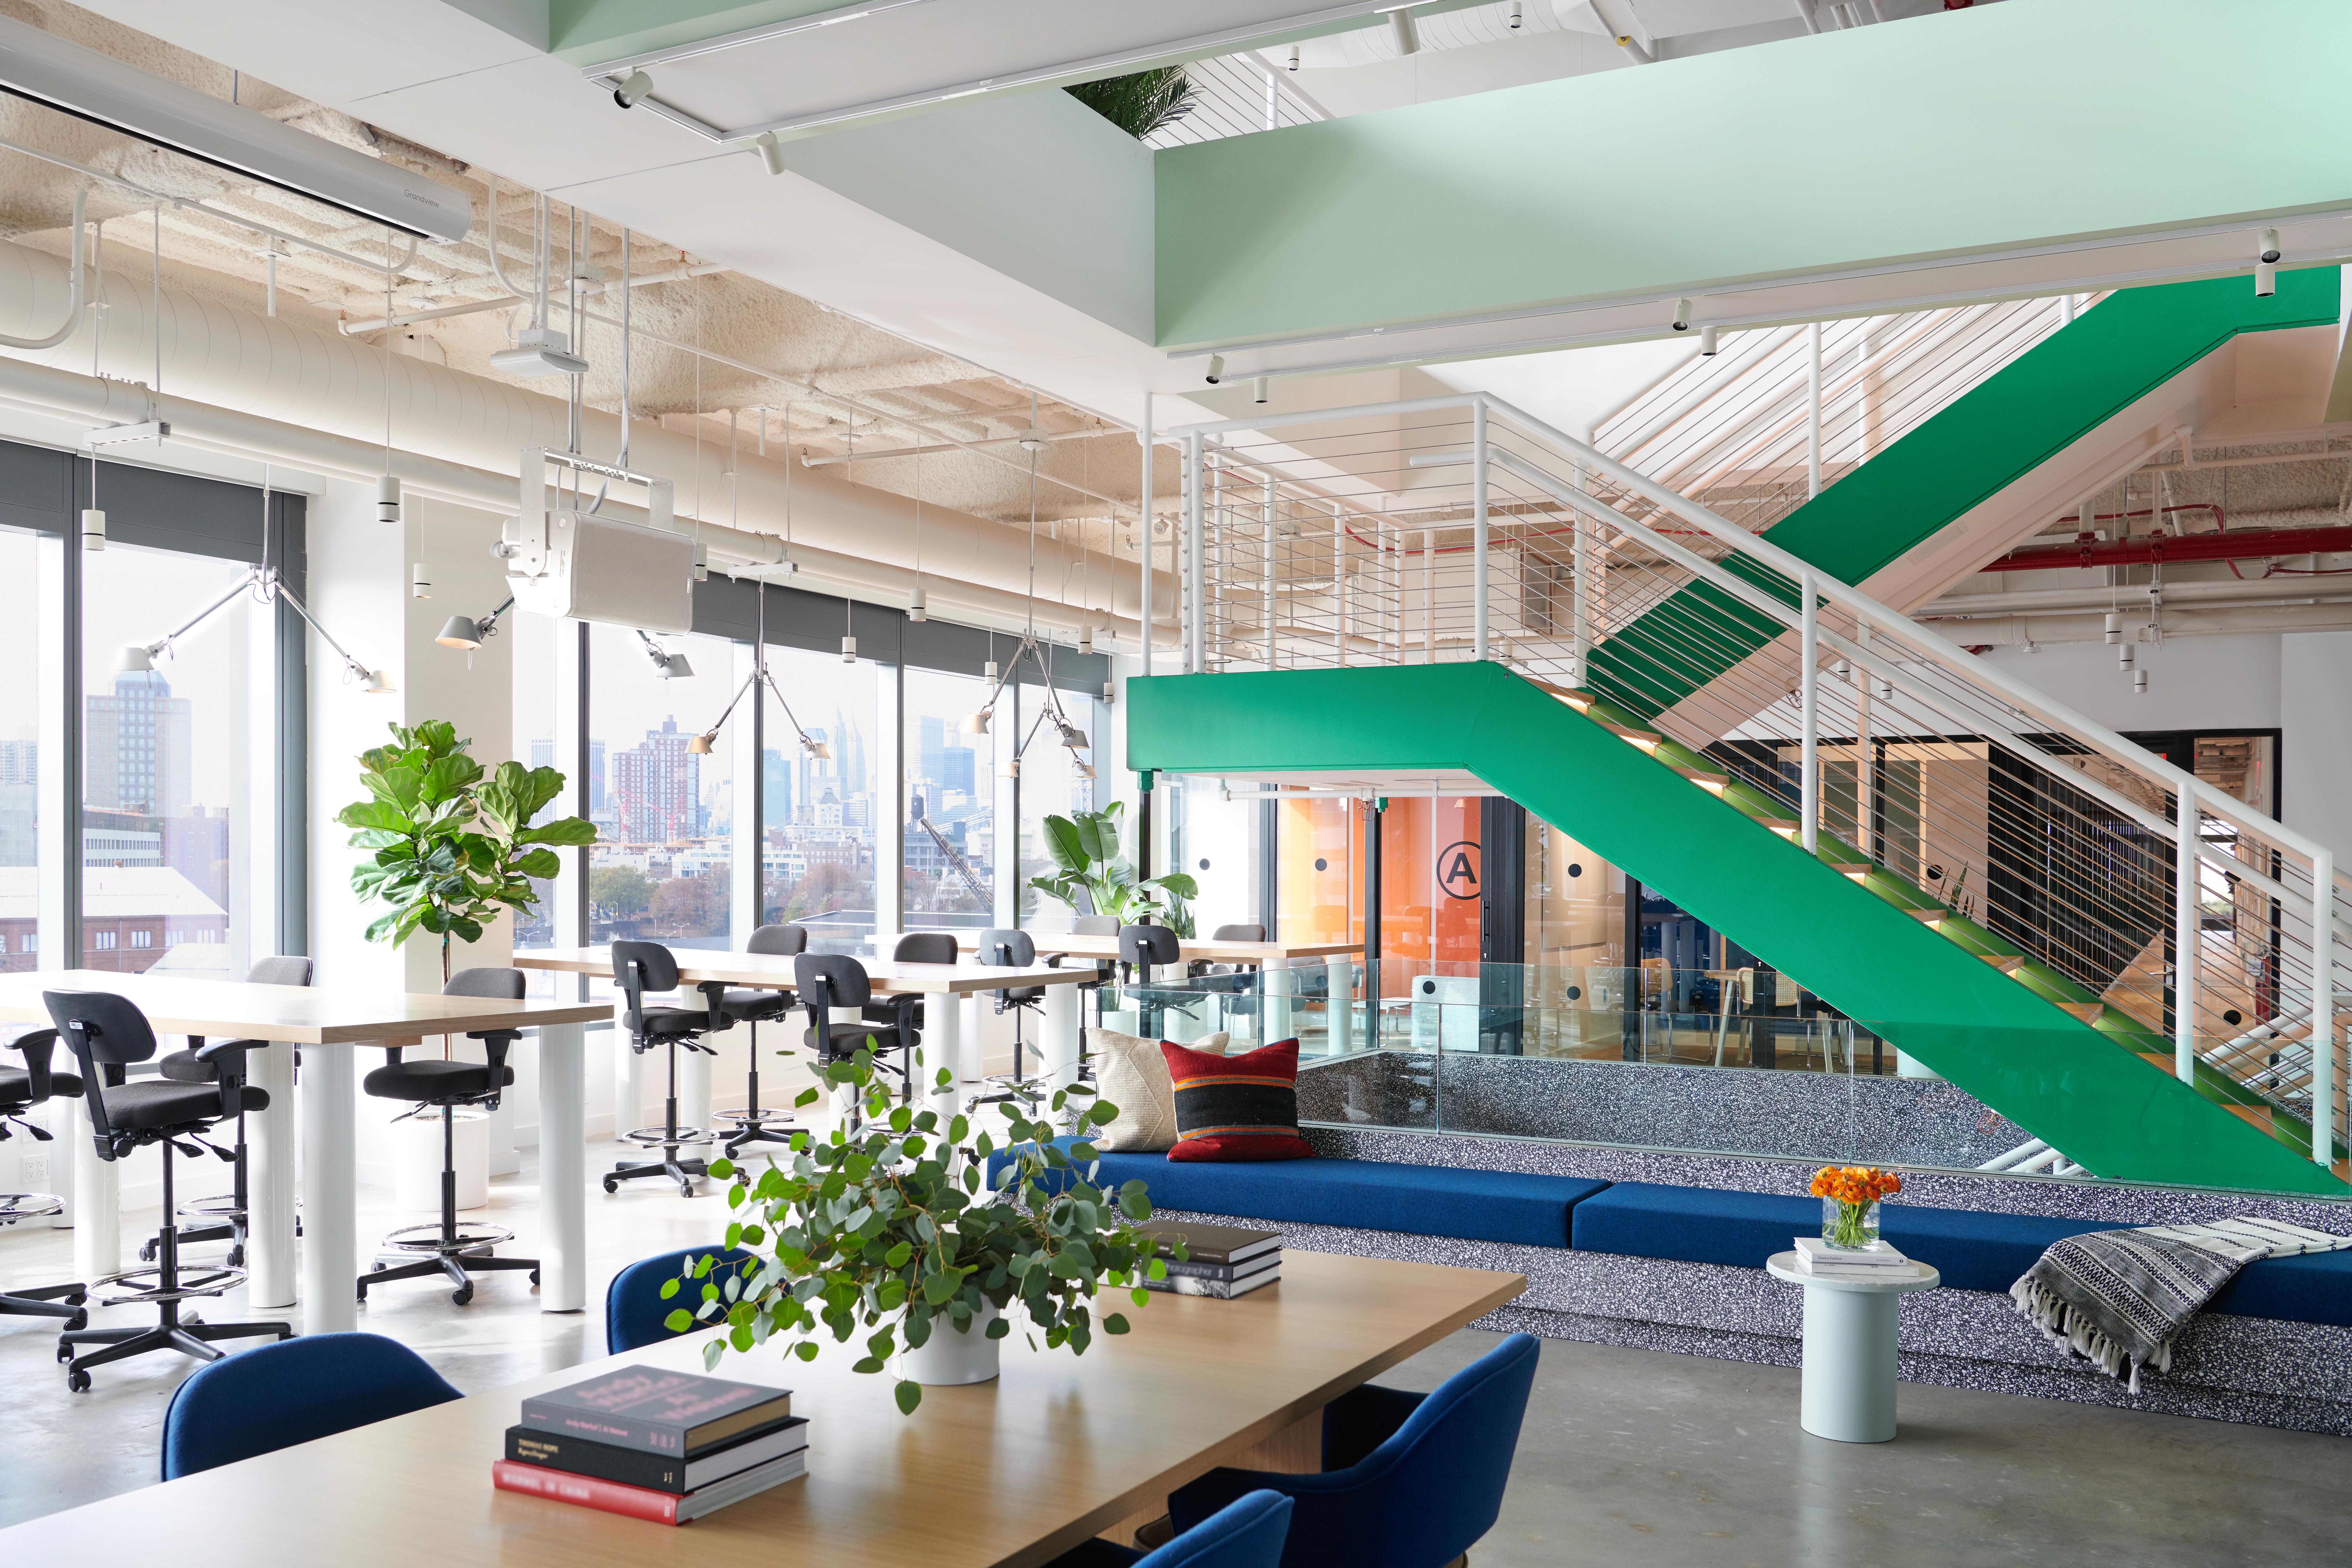 Common areas at WeWork blend work and leisure zones to provide diverse workspaces